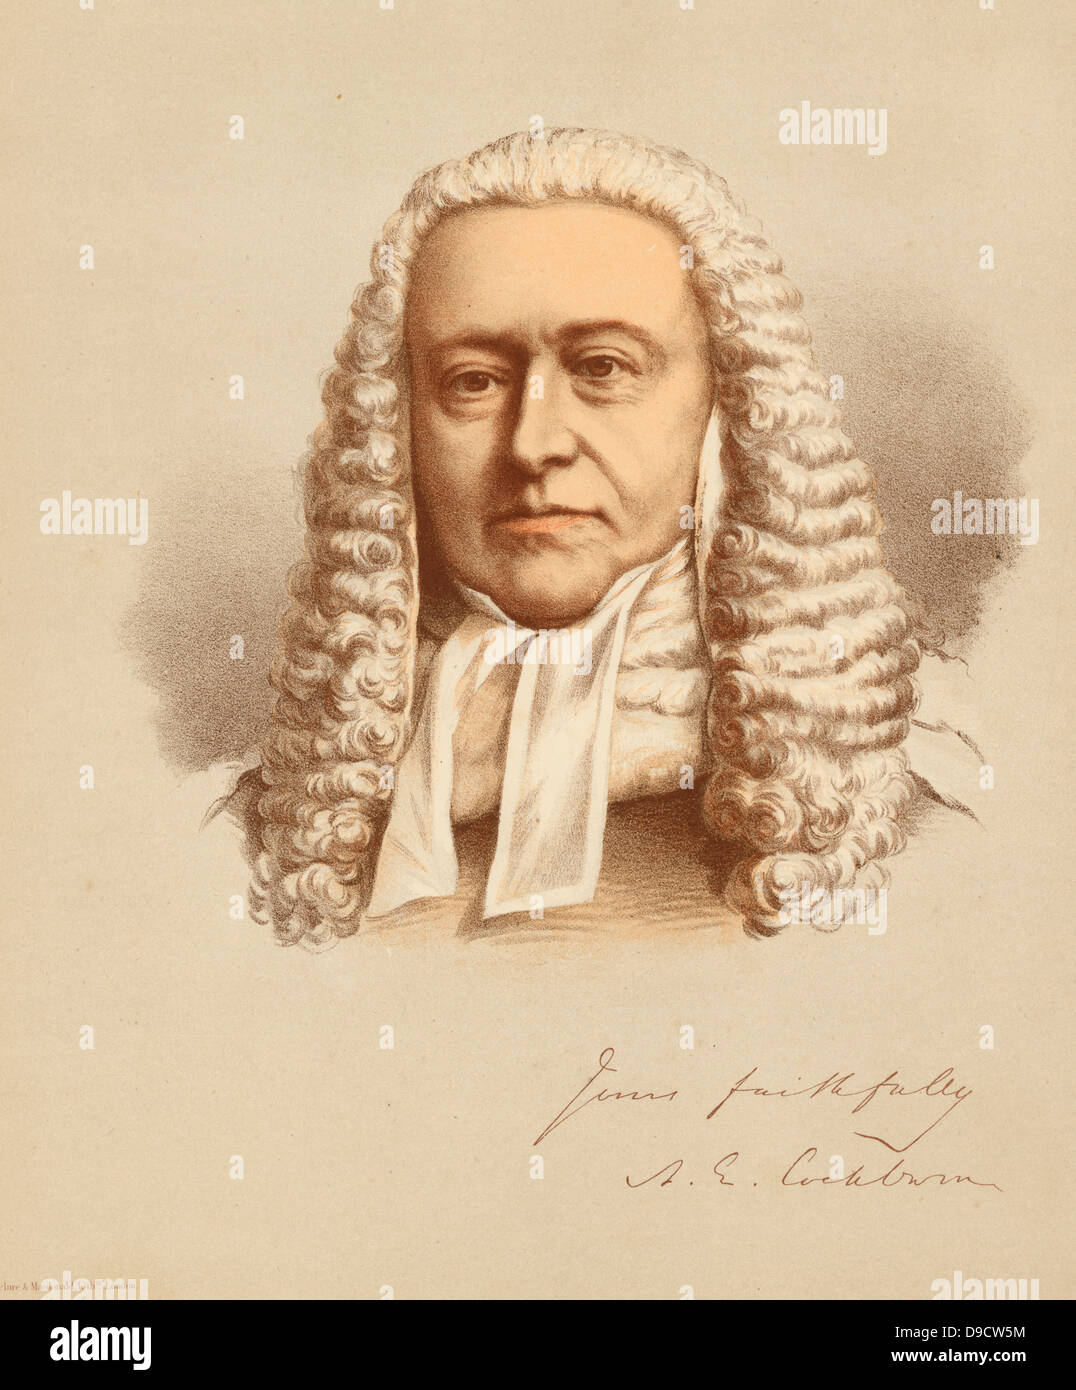 Alexander James Edward Cockburn (1802-1880) Scottish lawyer,  Liberal politician and judge , Member of Parliament for Southampton 1847-1857, Lord Chief Justice of England 1875-1880. Tinted lithograph c1880. Stock Photo